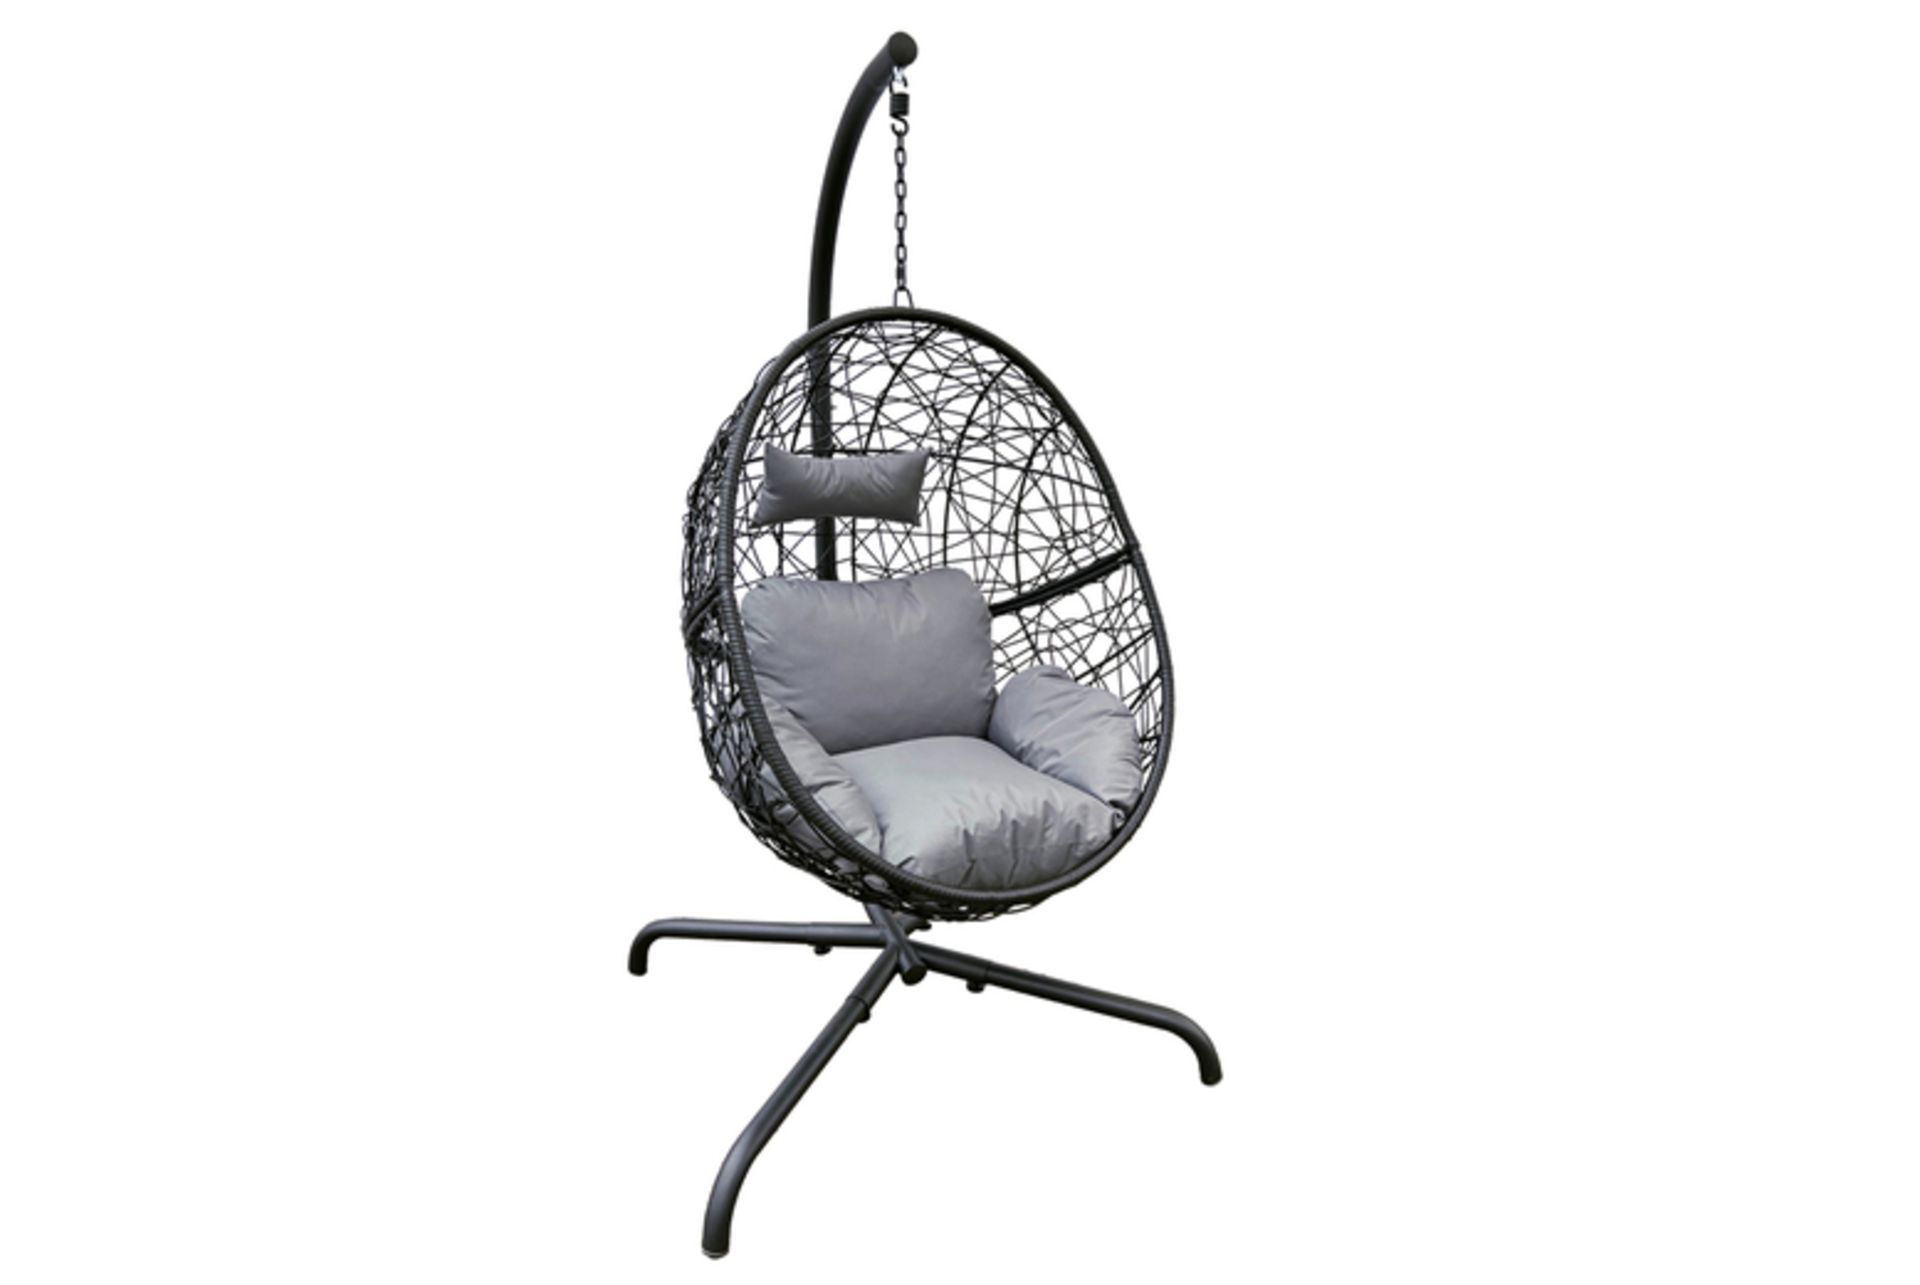 FREE DELIVERY - JOB LOT OF 5X HANGING EGG CHAIR WITH A CUSHION AND PILLOW - BLACK - Image 2 of 2